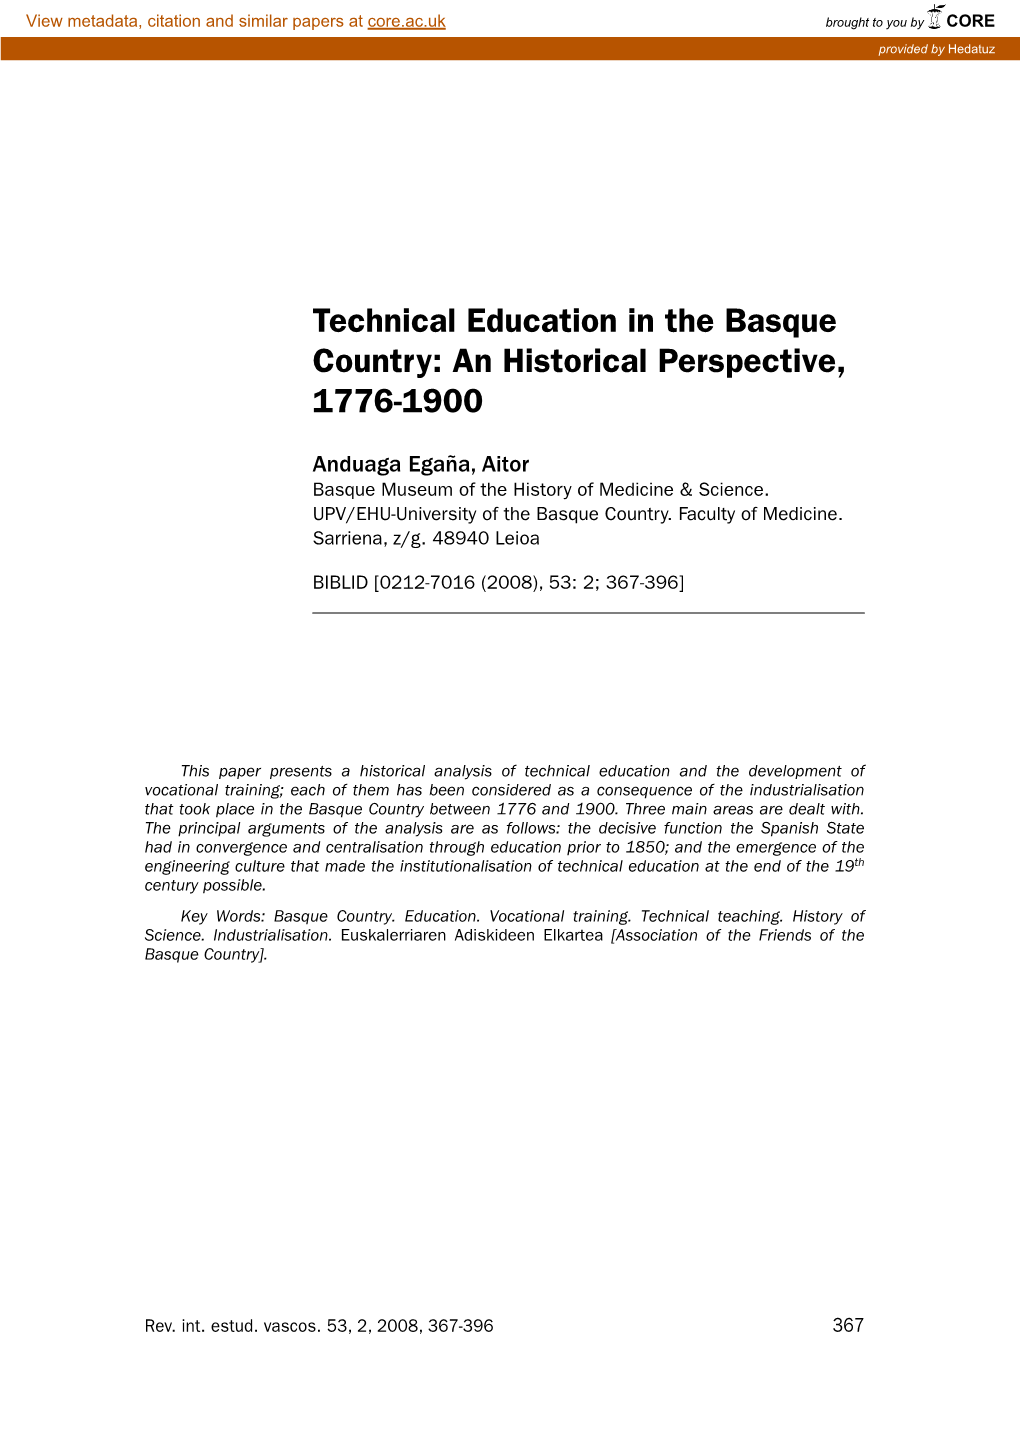 Technical Education in the Basque Country: an Historical Perspective, 1776-1900